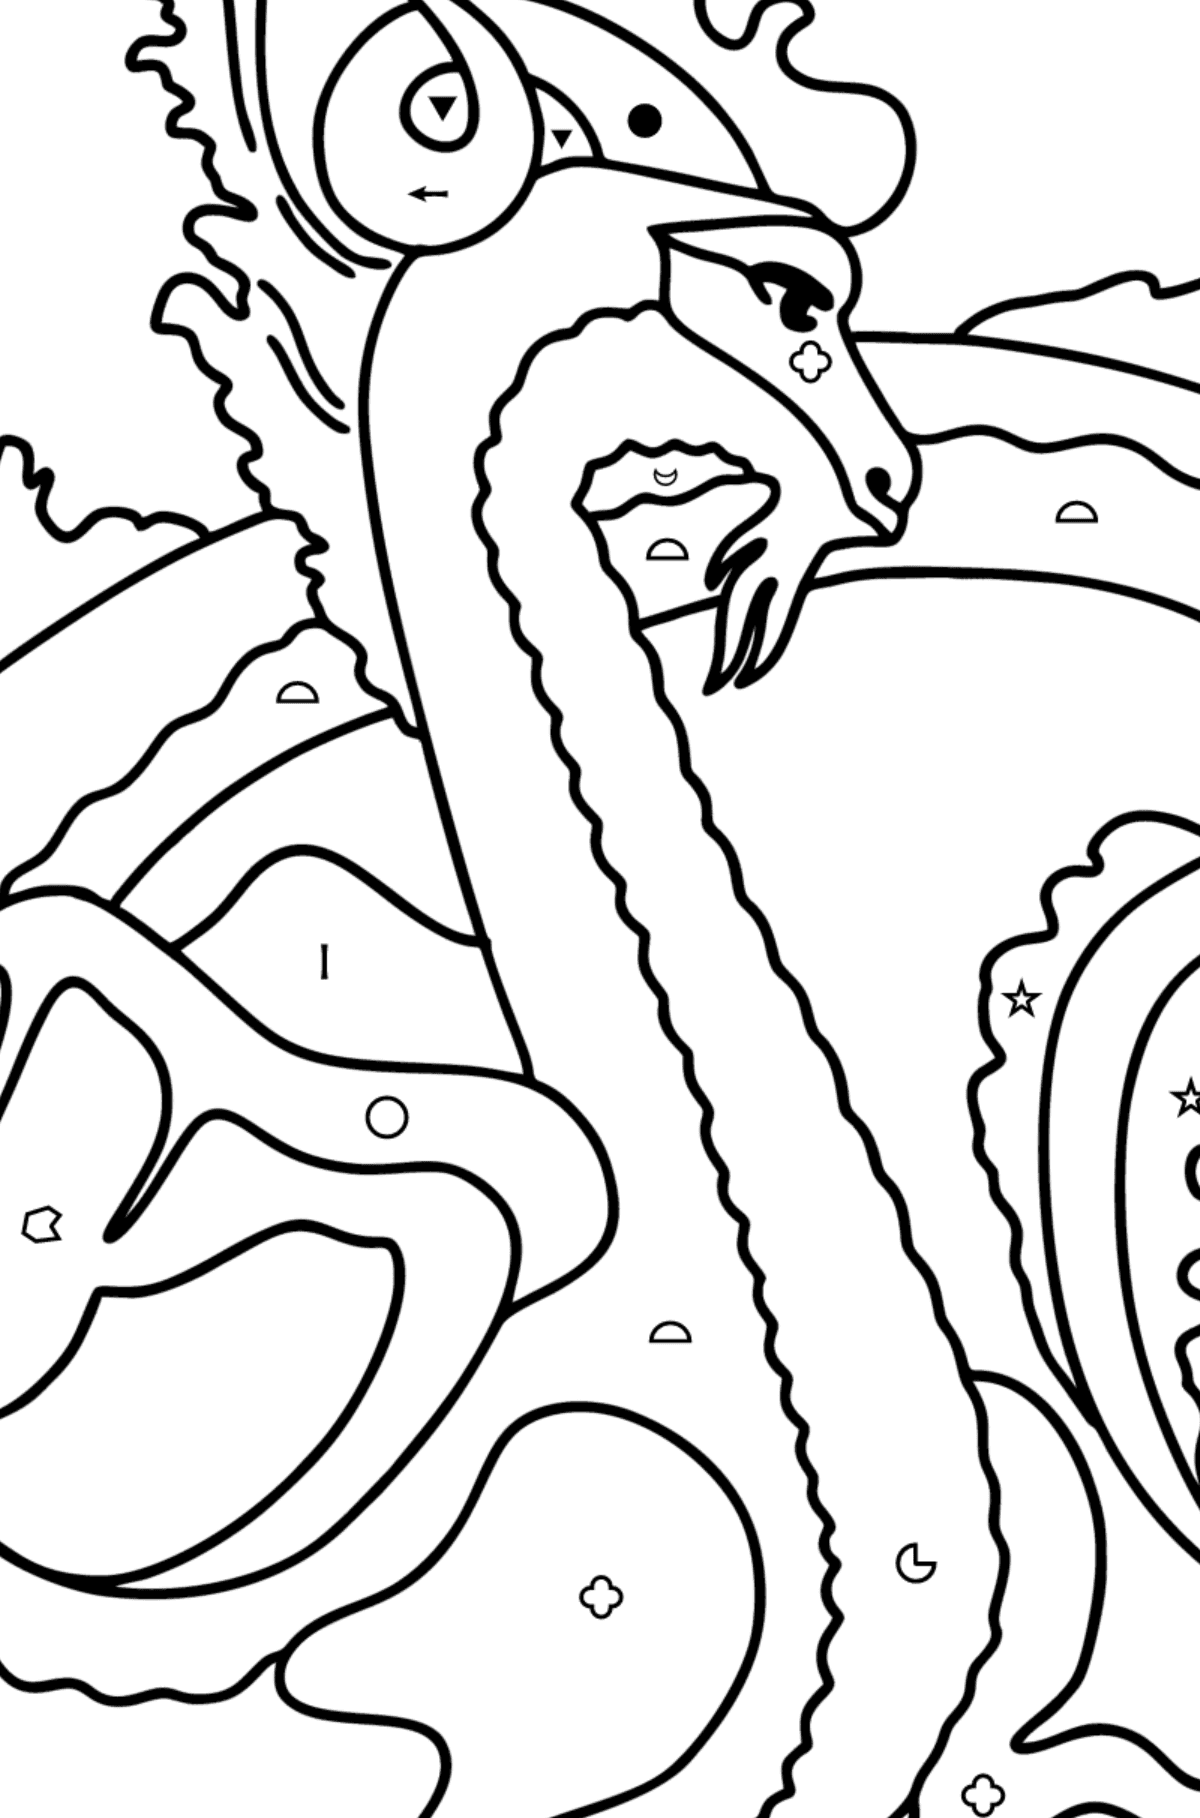 Mythical Dragon coloring page - Coloring by Symbols and Geometric Shapes for Kids